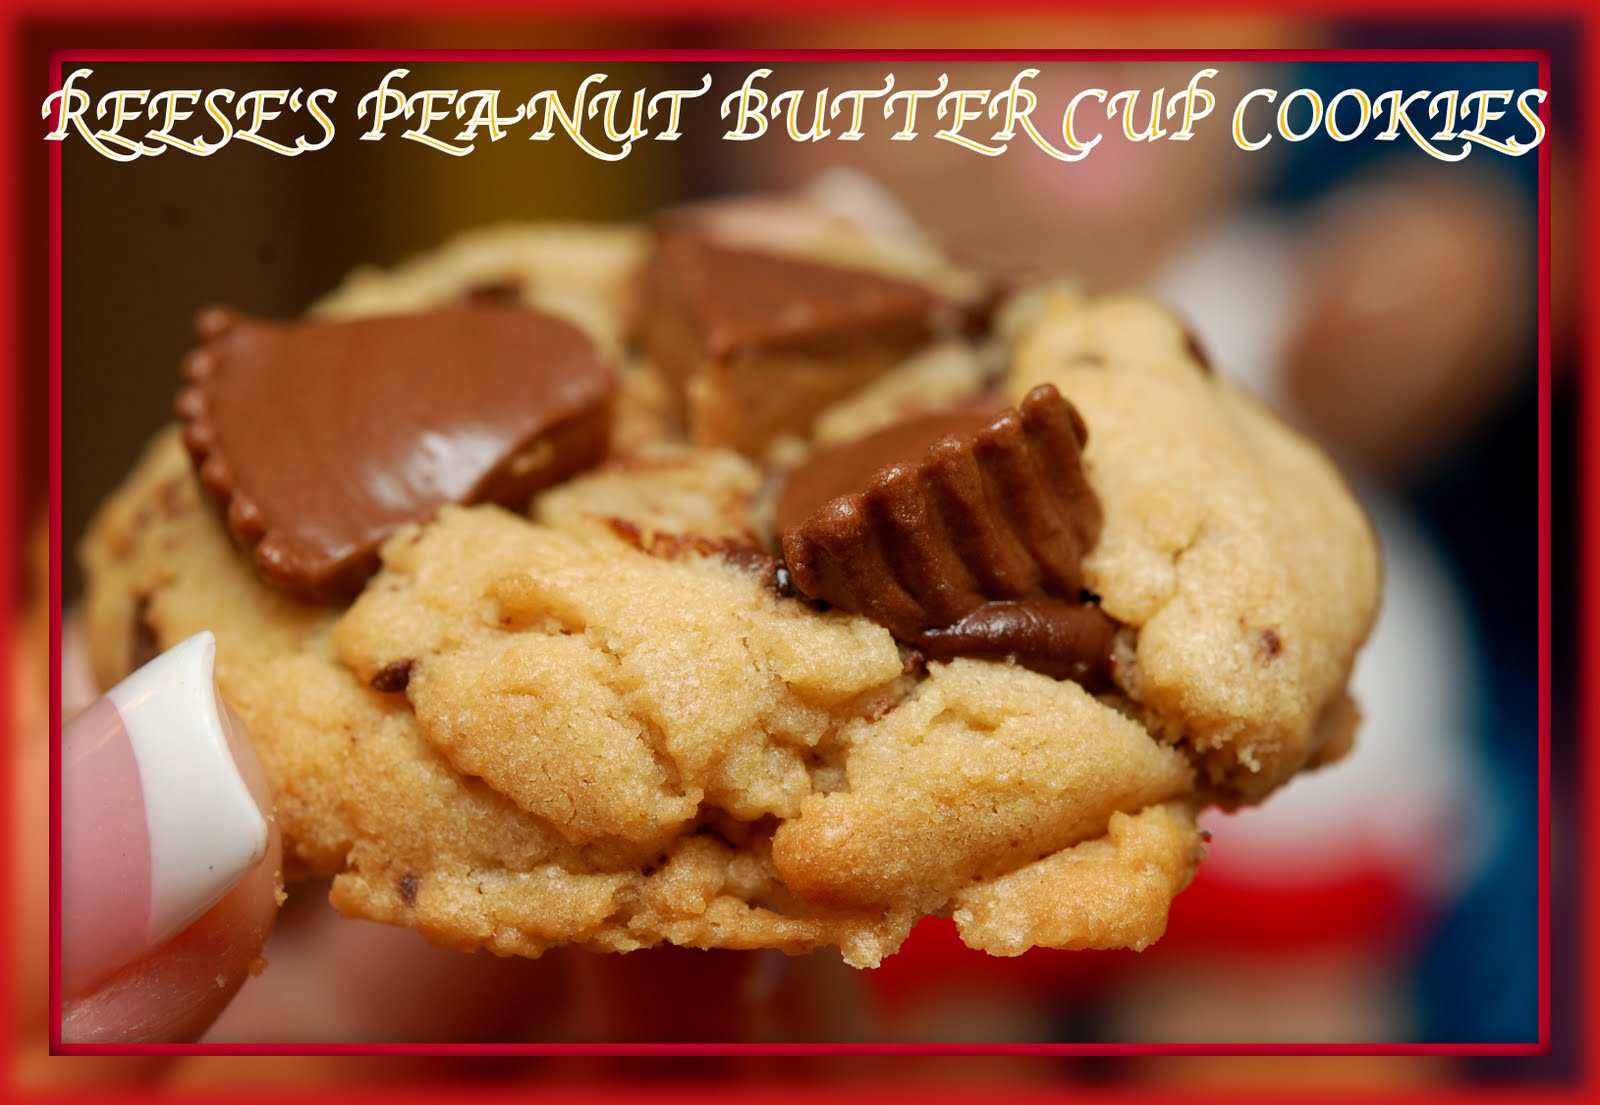 Peanut Butter Cookies With Peanut Butter Cups
 OVER THE TOP REESE S PEANUT BUTTER CUP COOKIES Hugs and